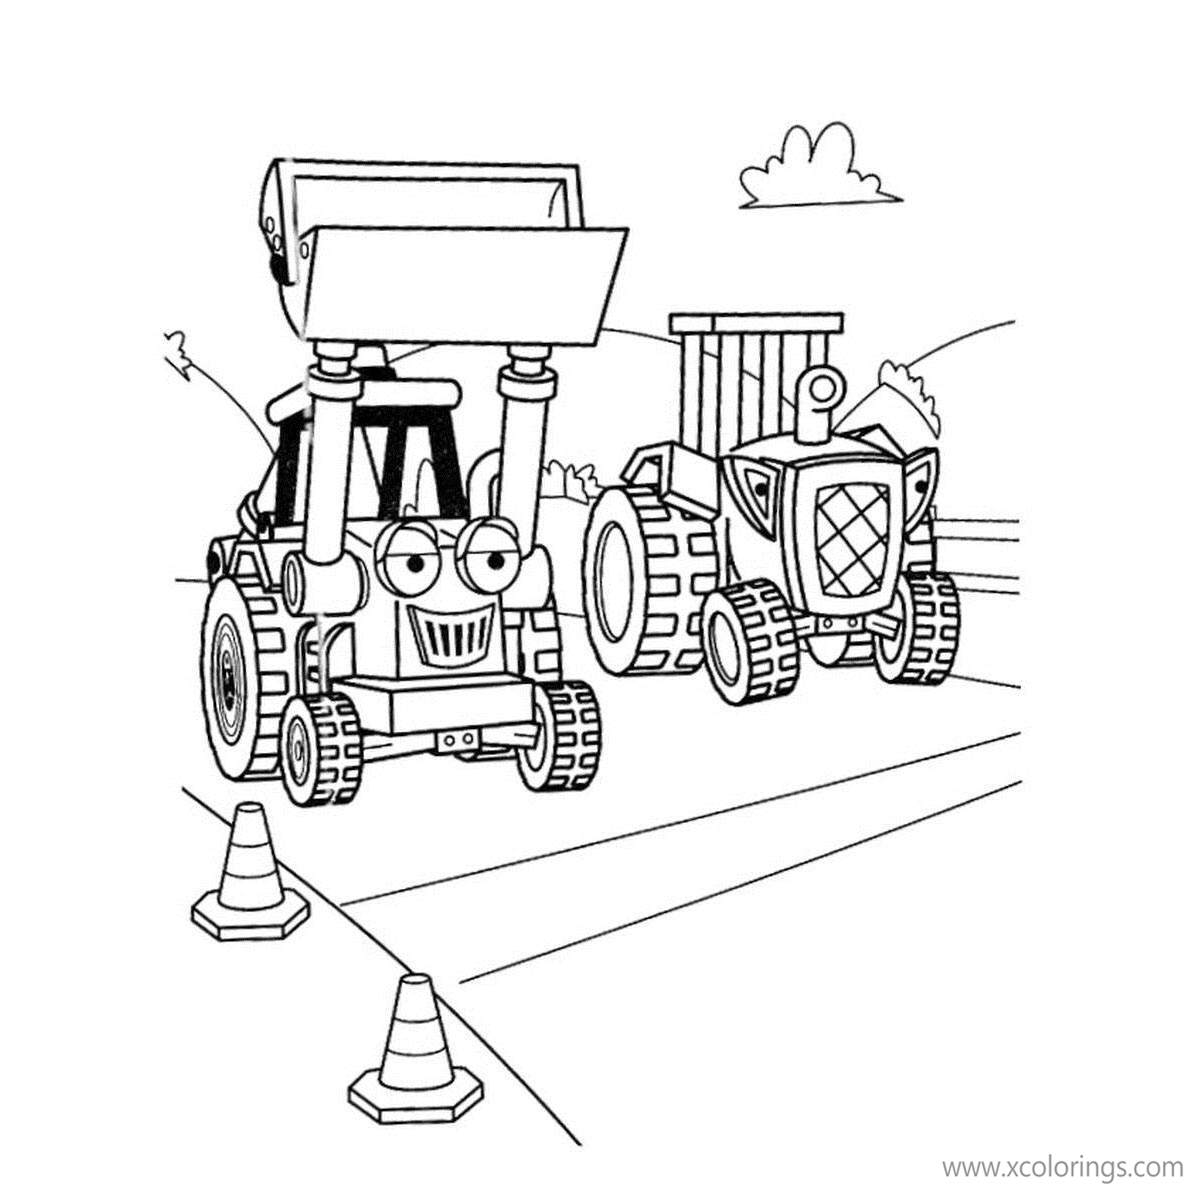 Free Bob The Builder Coloring Pages Travis and Scoop printable